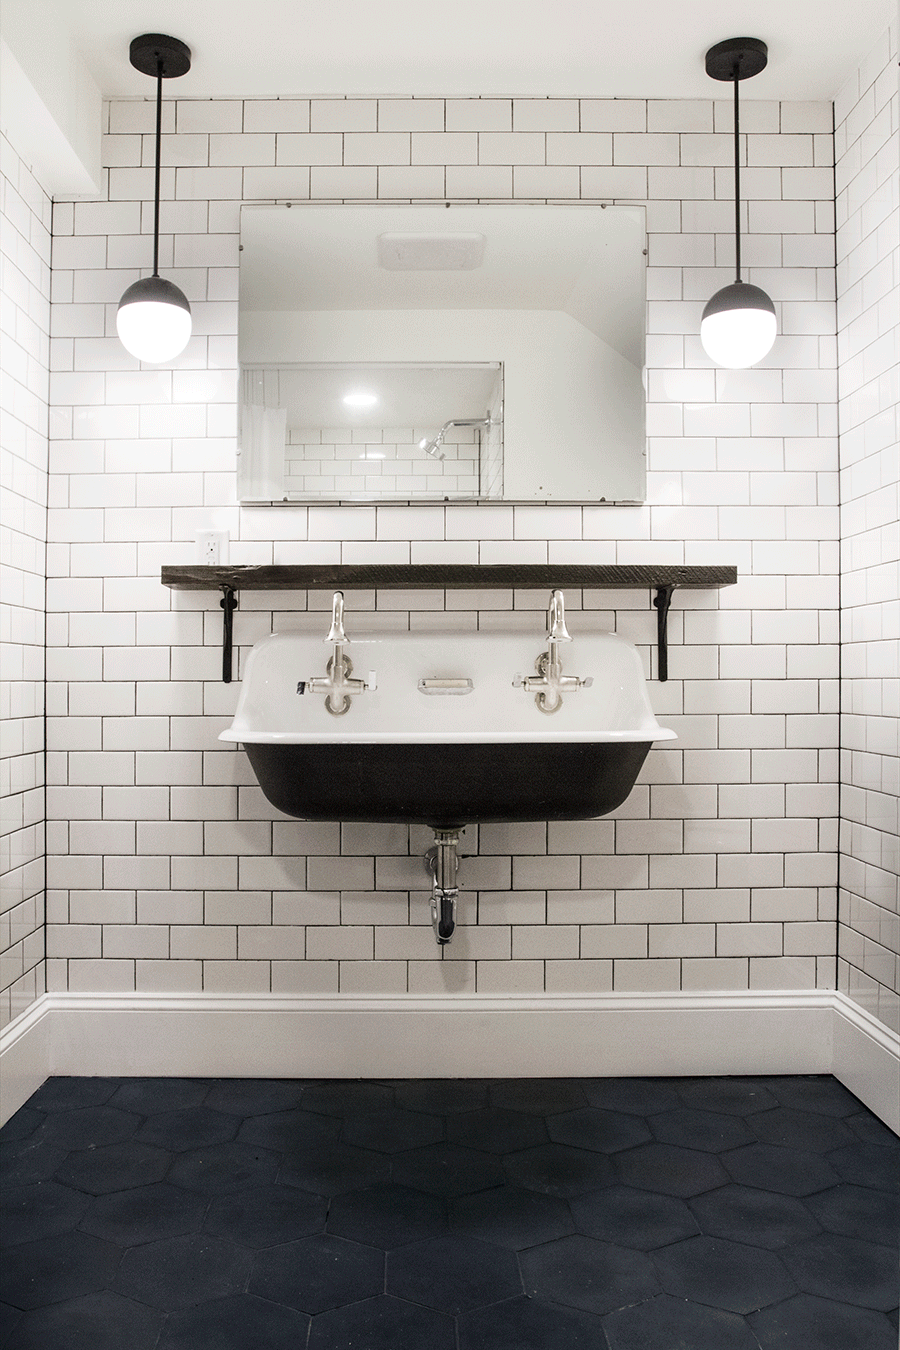 Is subway tile too trendy to put in a new home or remodel? Farmhouse has made subway tile uber popular, is it too trendy to consider for your next home DIY project?